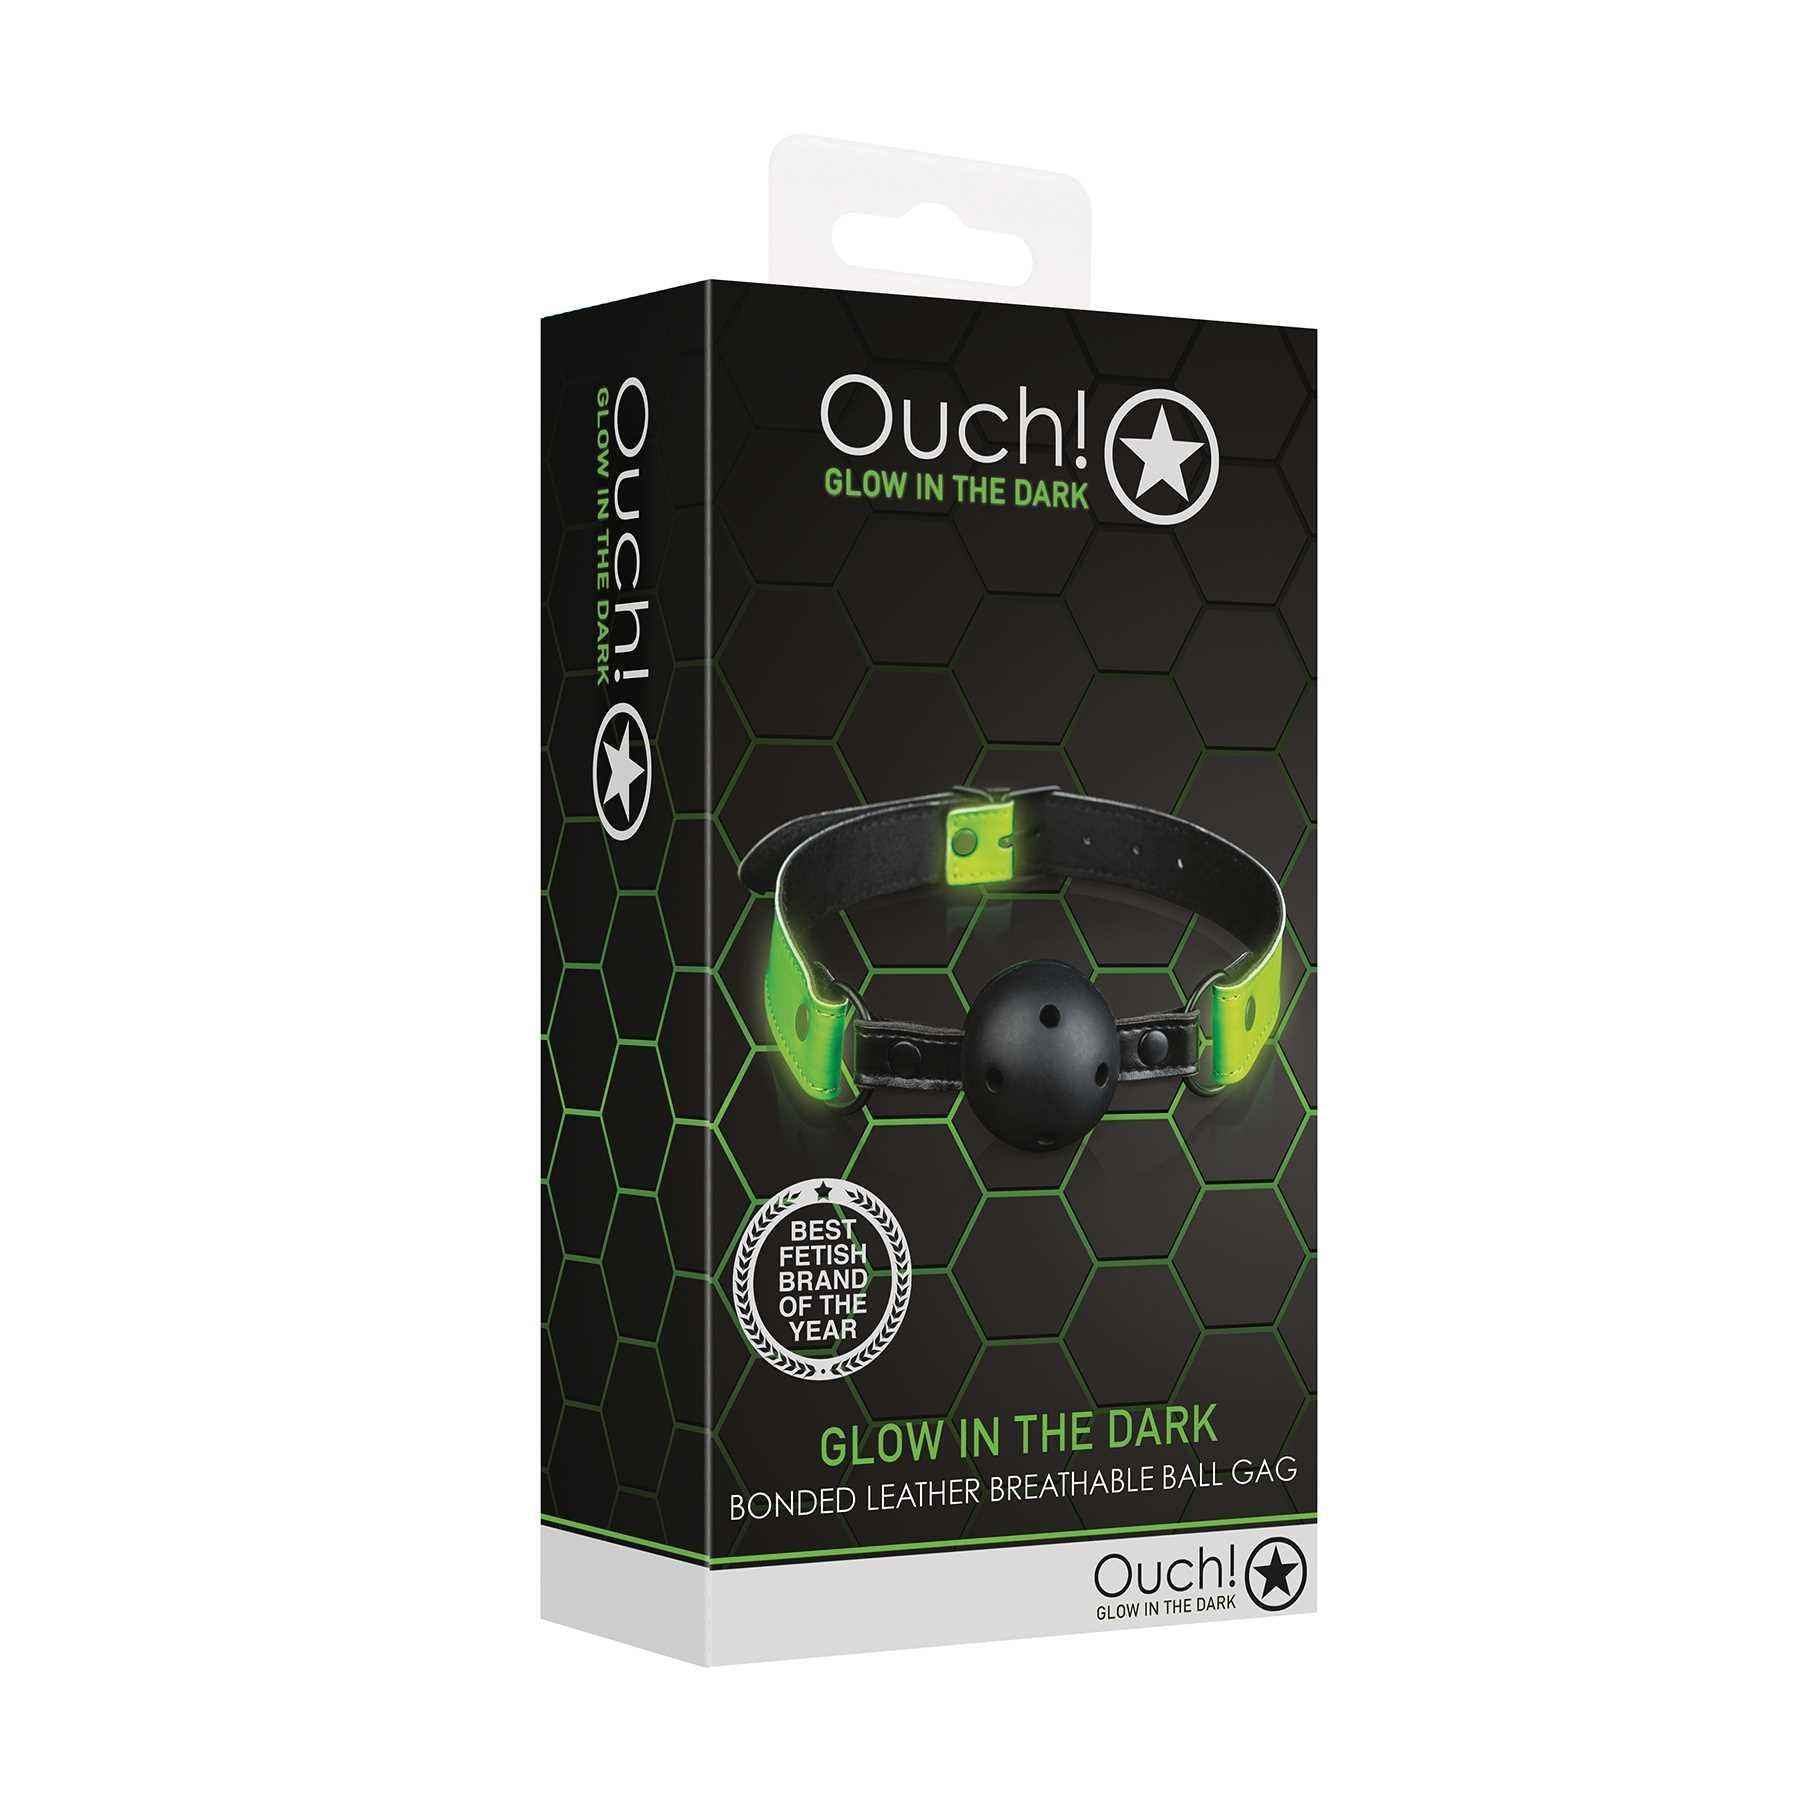 Ouch! Glow In The Dark Ball Gag packaging